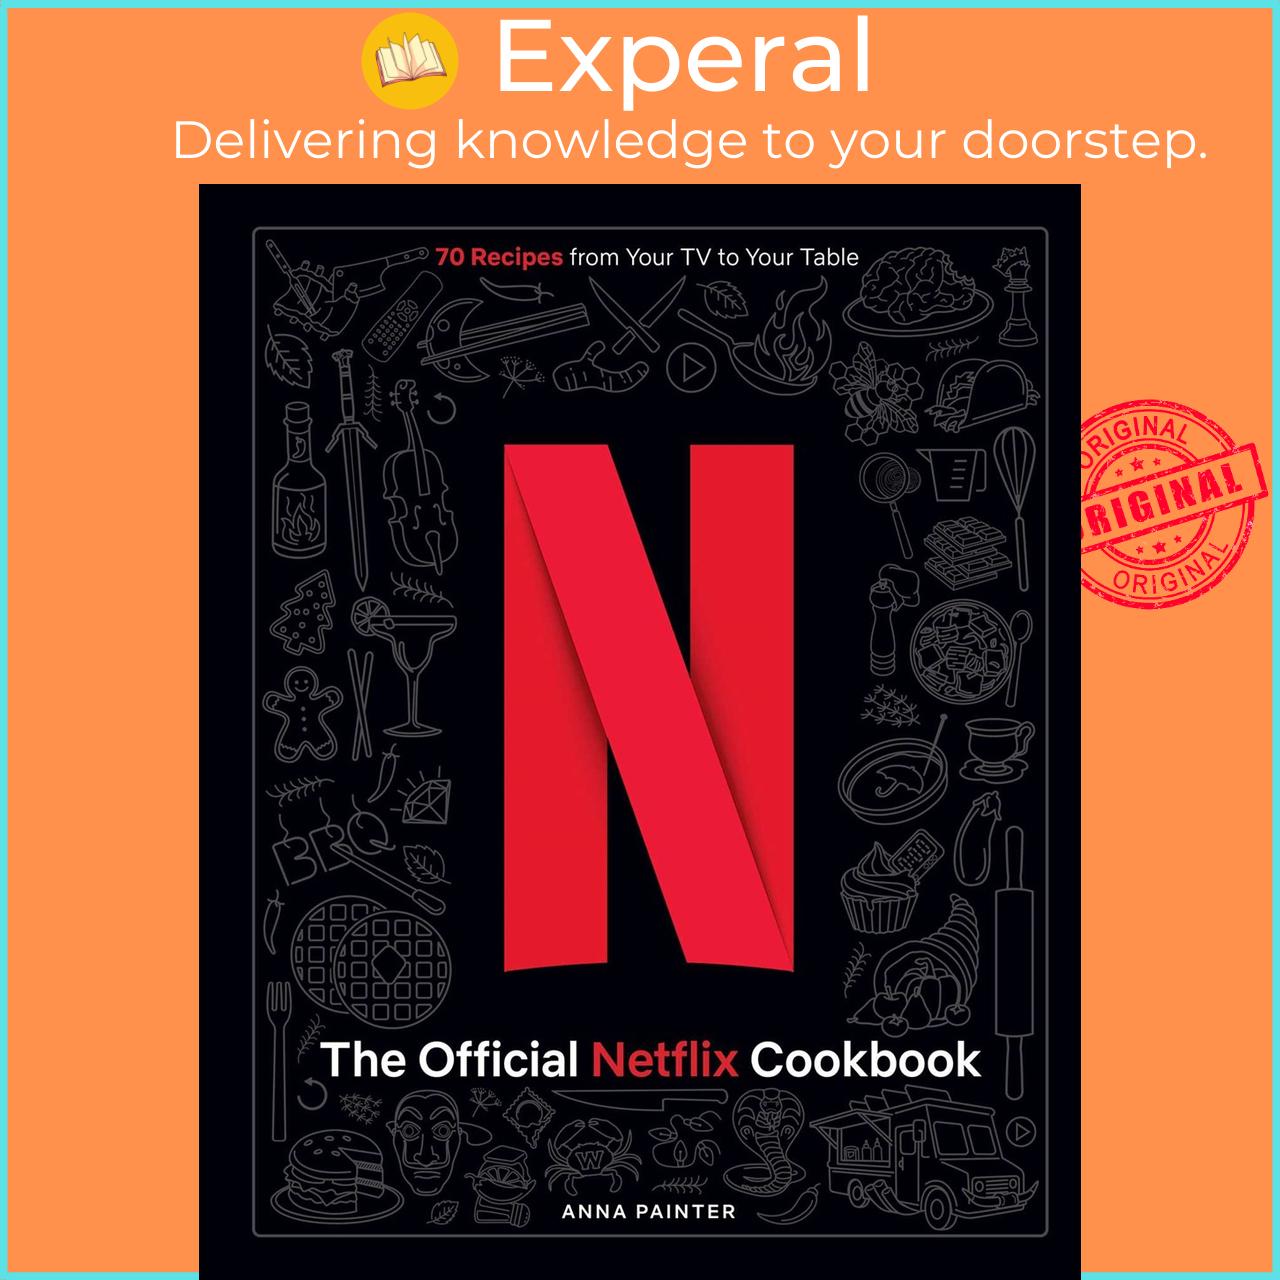 Sách - The Official Netflix Cookbook - 70 Recipes from Your TV to Your Table by Insight Editions (US edition, Hardcover)